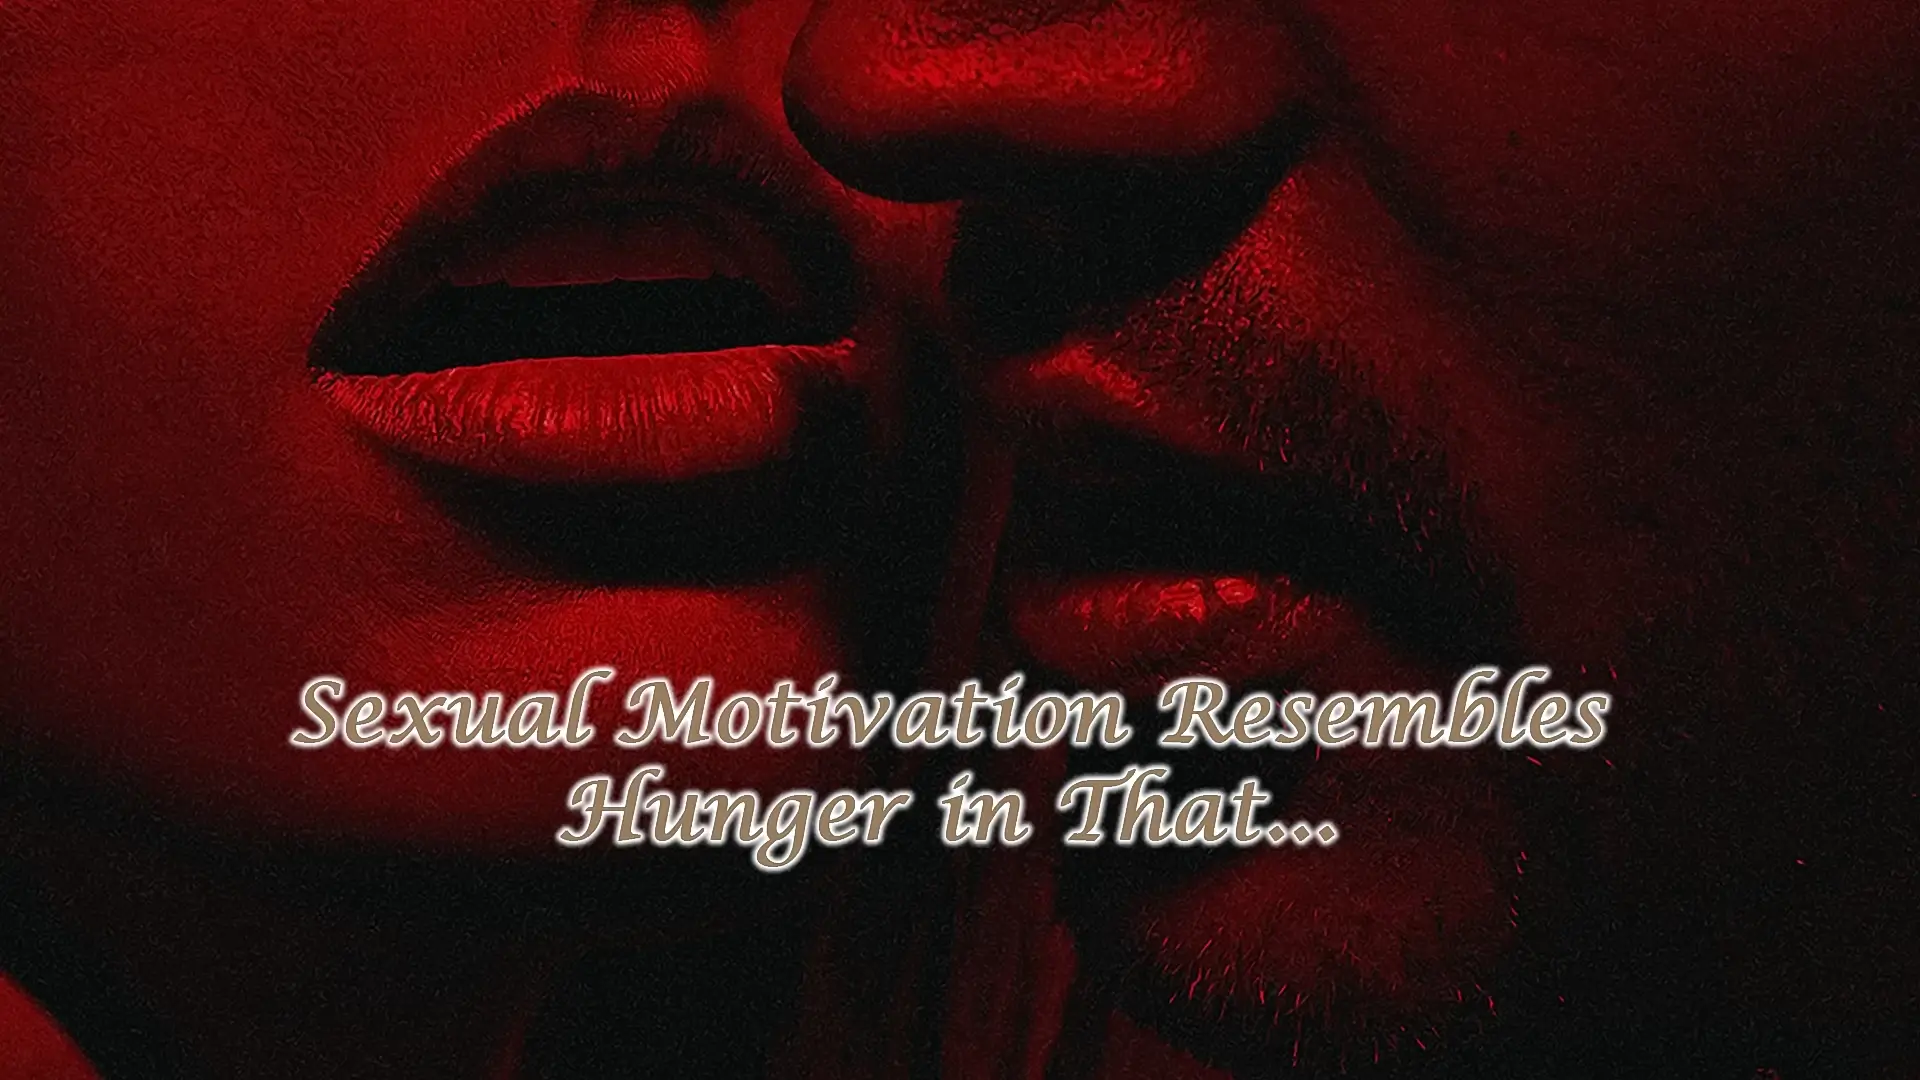 The Intriguing Parallels: Sexual Motivation Resembles Hunger in That...